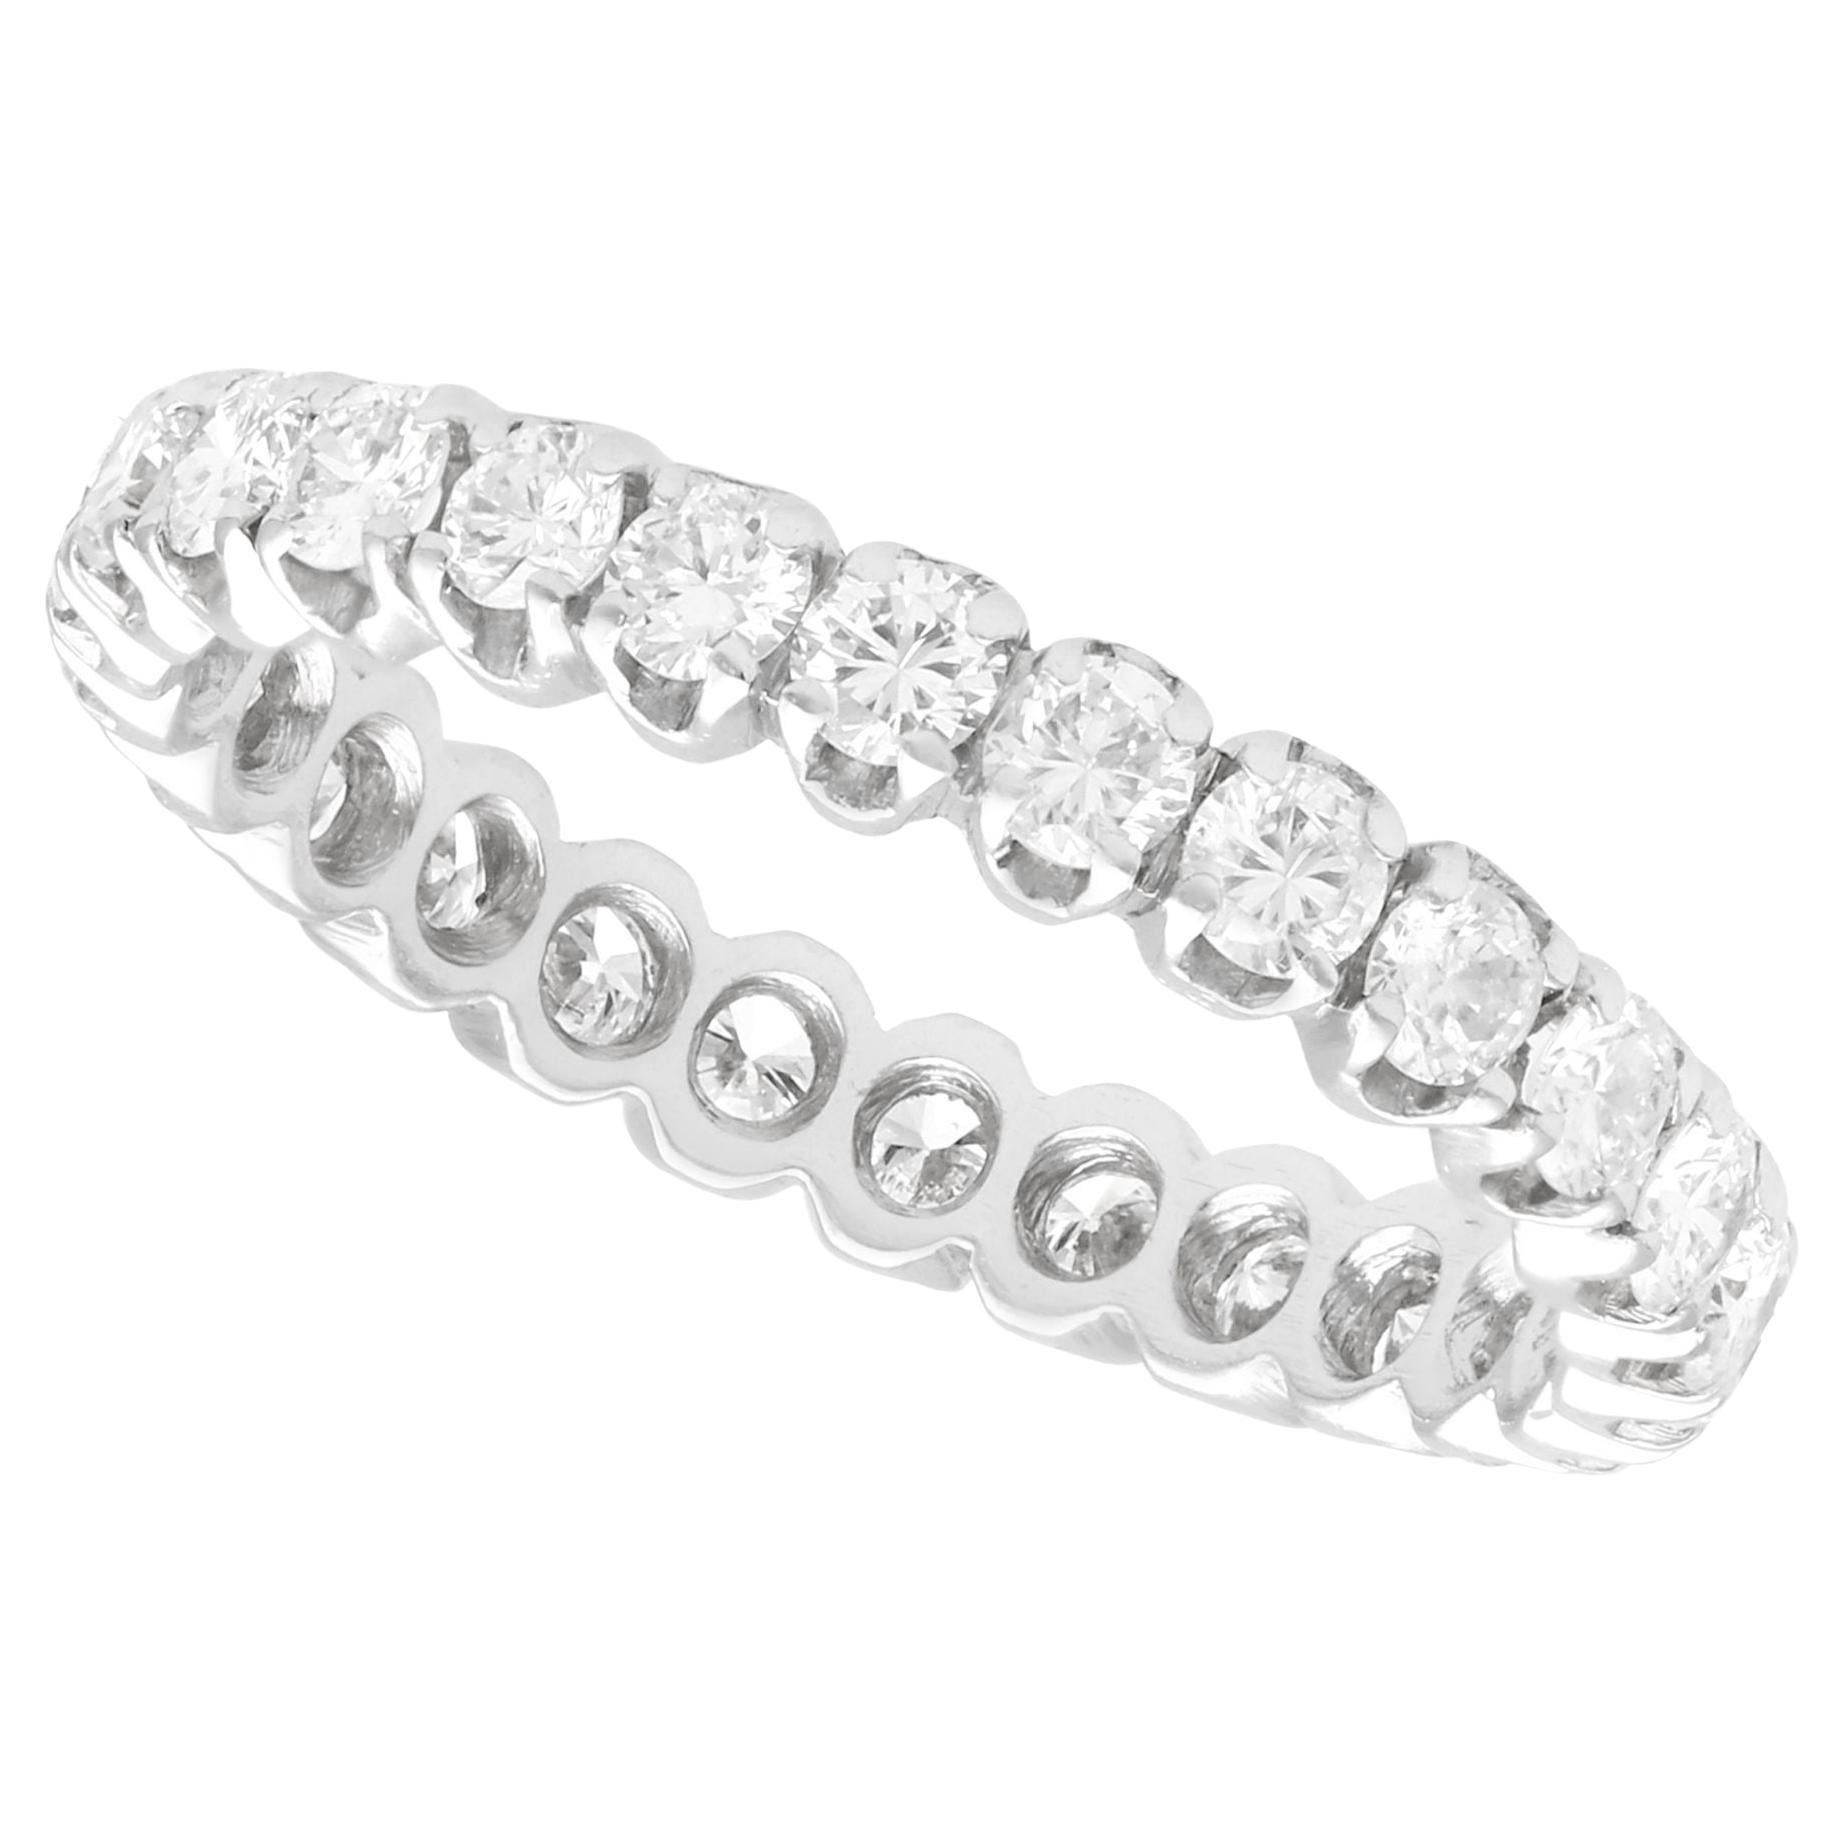 Vintage French 1.10 Carat Diamond and White Gold Full Eternity Ring circa 1970 For Sale